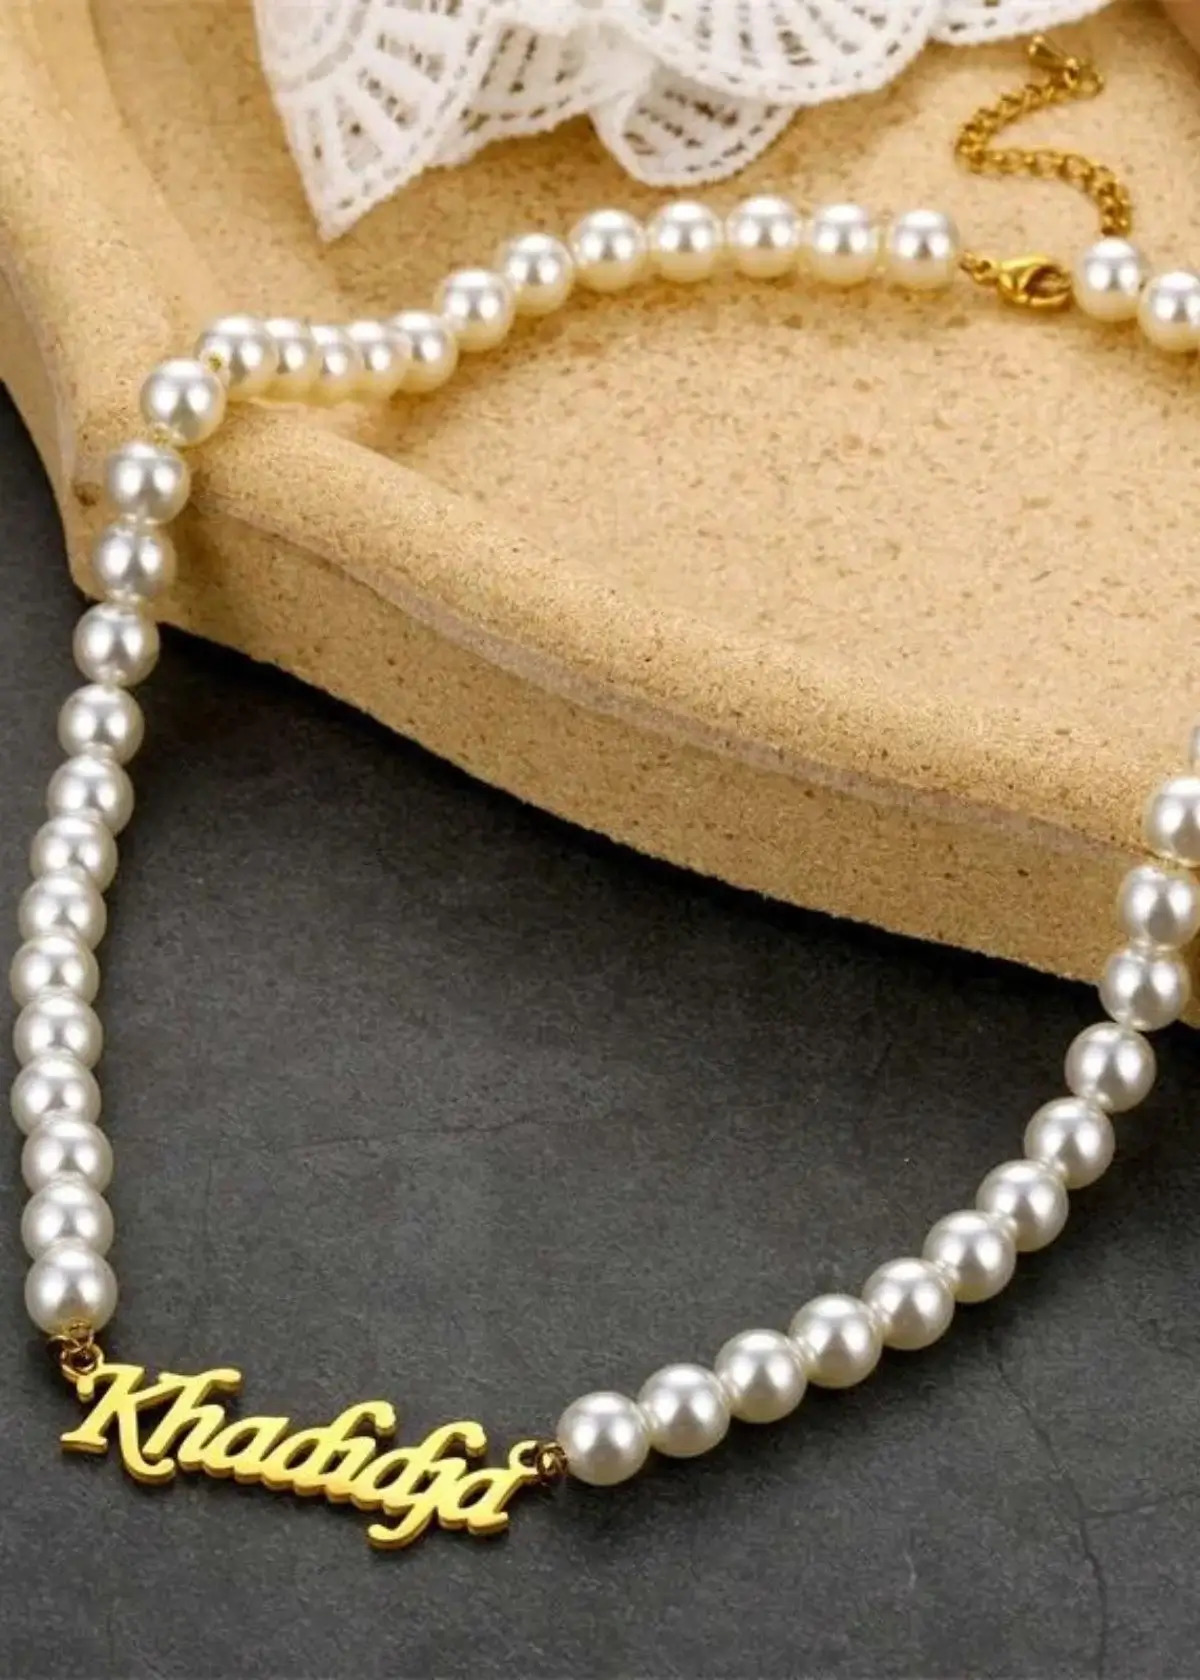 What metals are used in a pearl name necklace?